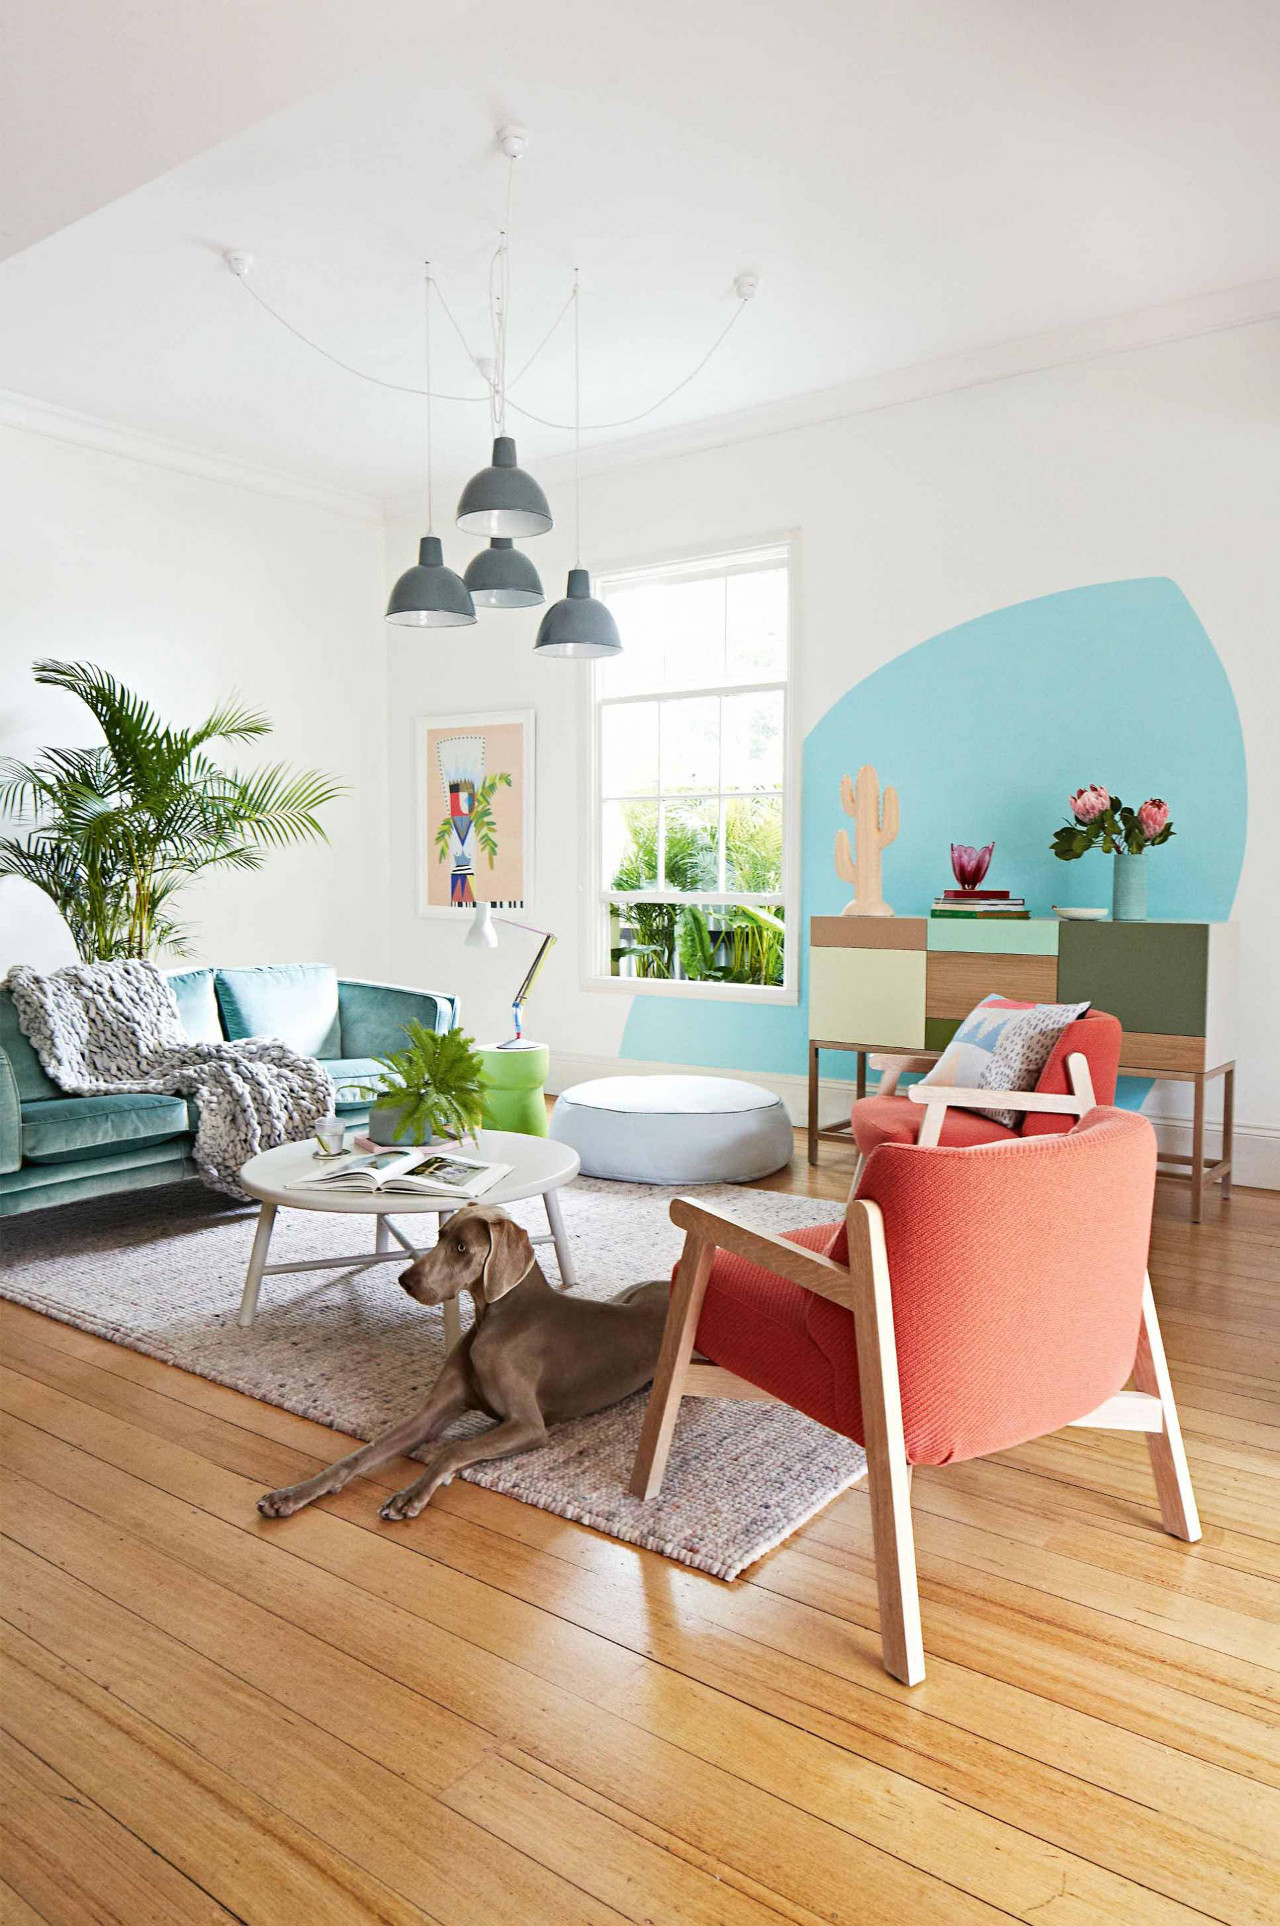 Spotted: A Modern, Colorful Home + A Weimaraner